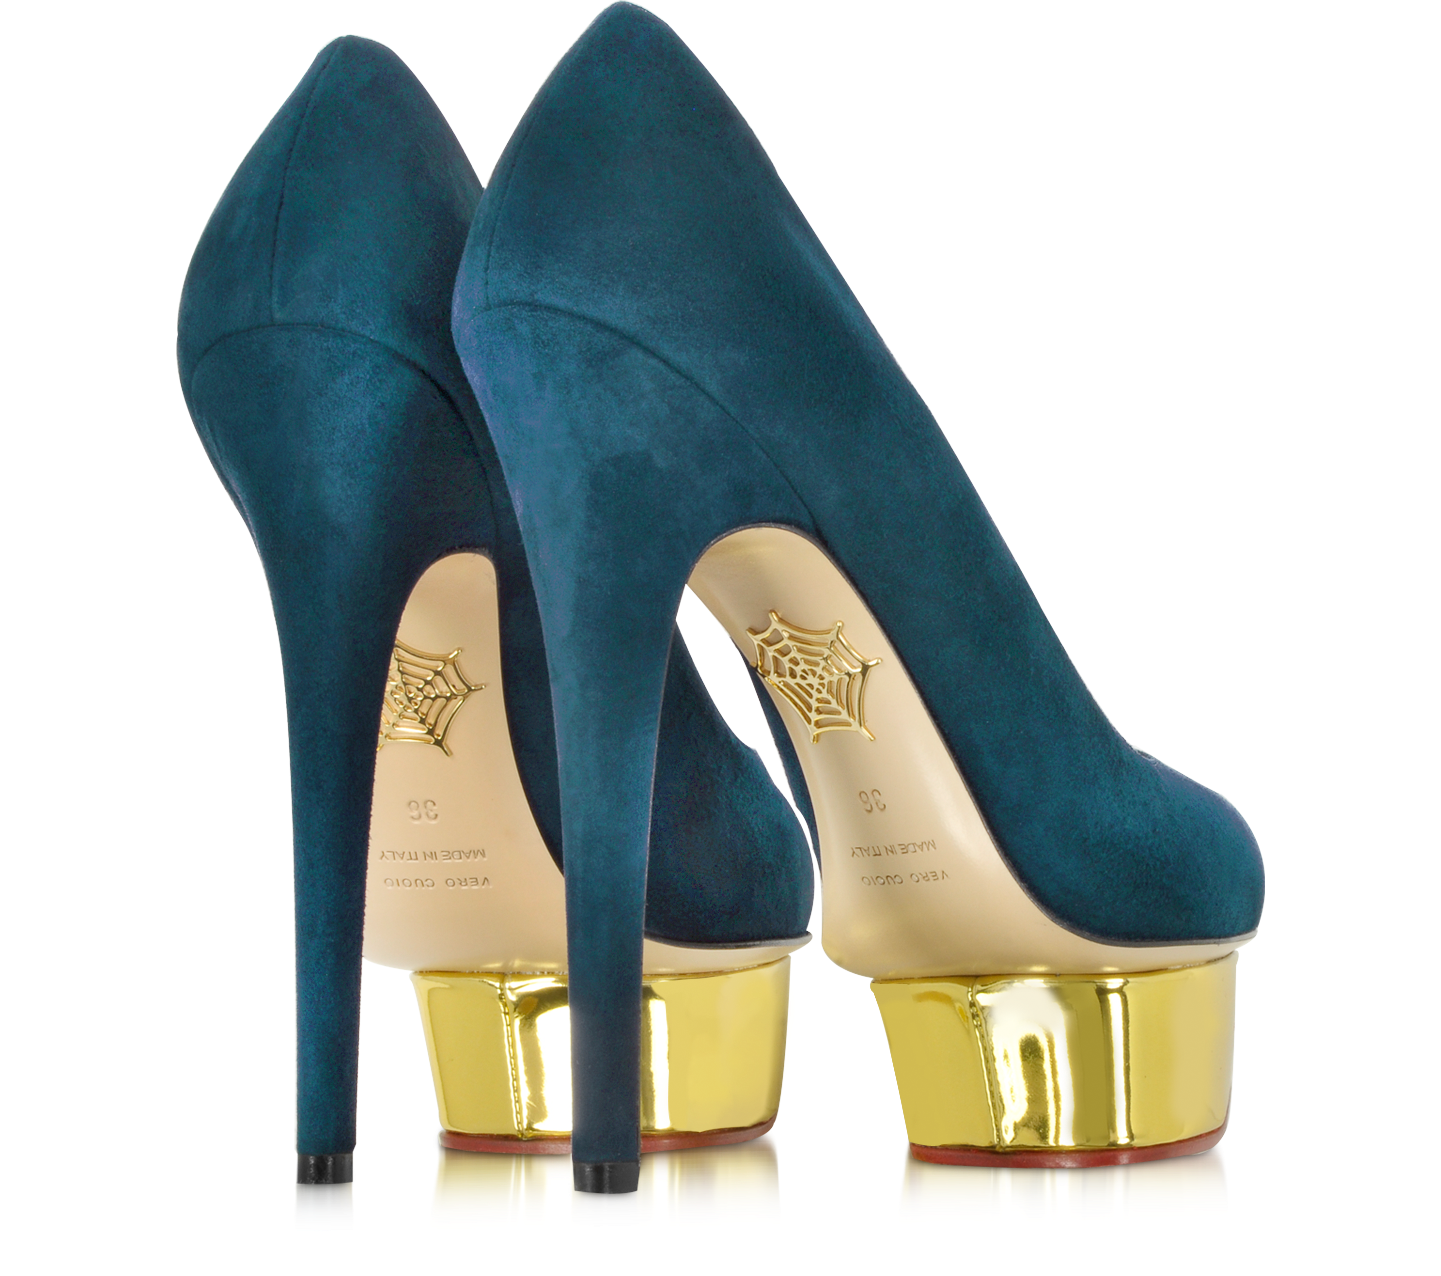 Charlotte Olympia Dolly Teal Suede Platform Pump 35 IT/EU at FORZIERI